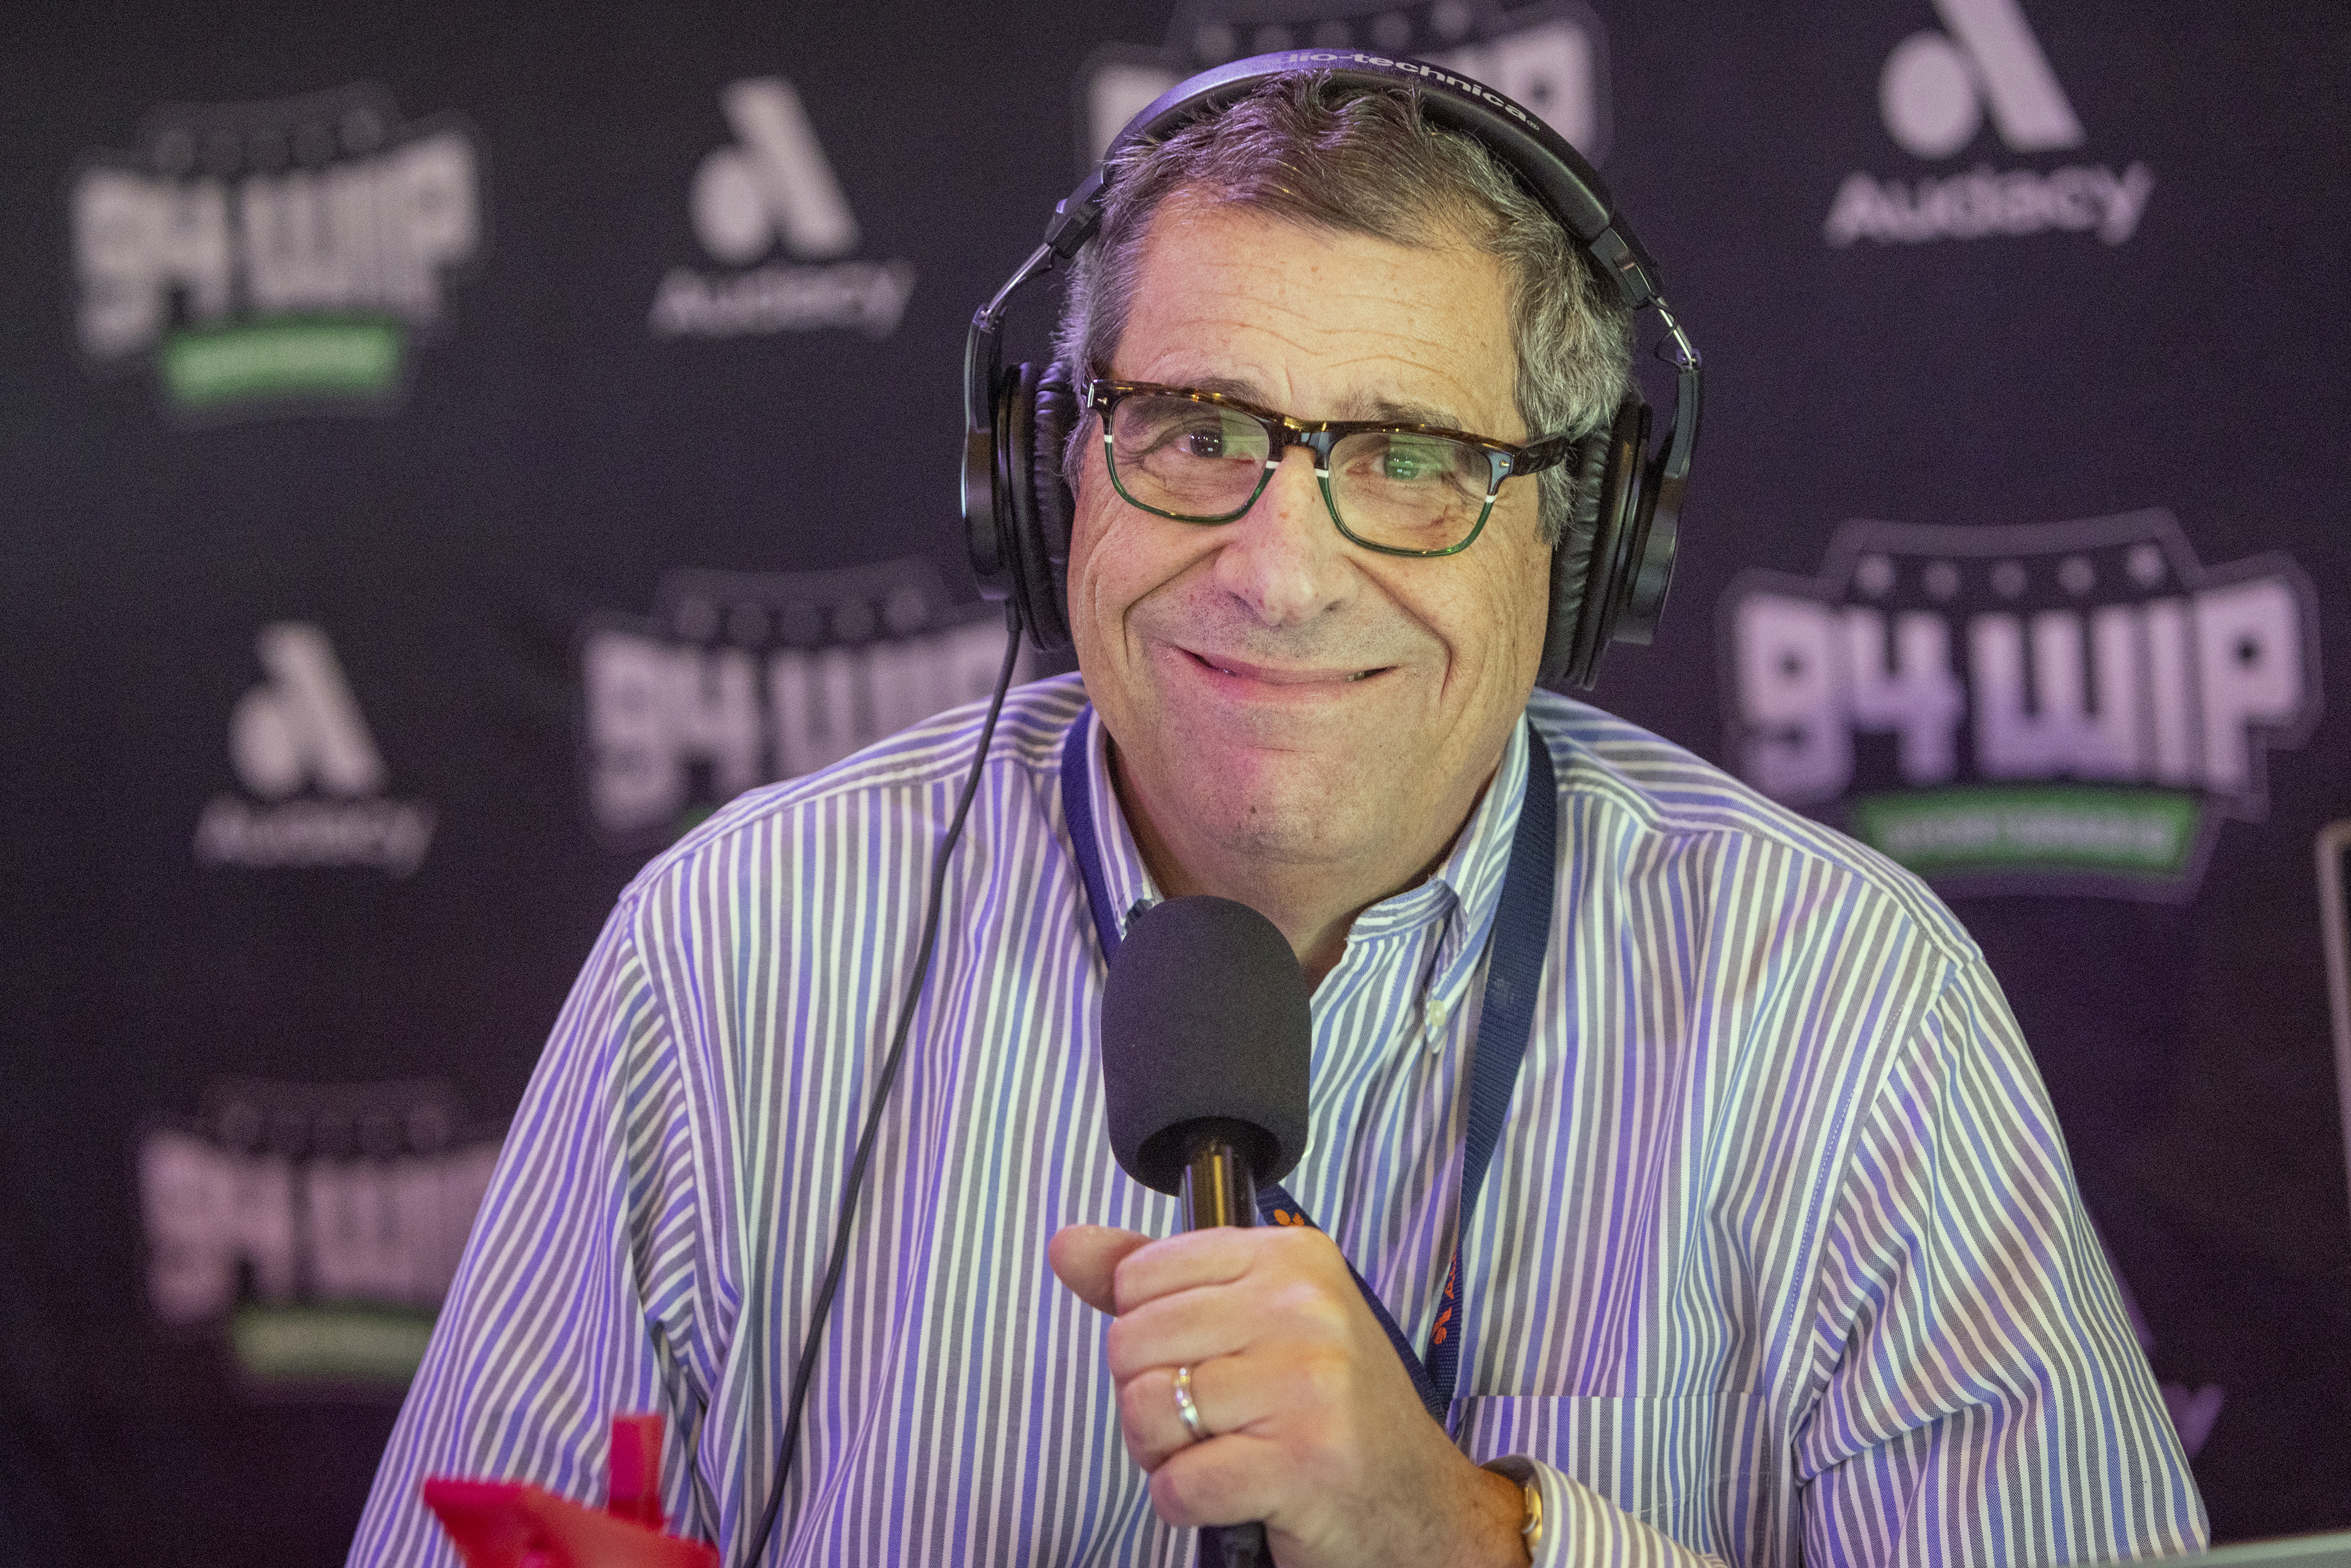 94.1 WIP's Angelo Cataldi hosts final show. New WIP lineup debuts Monday.